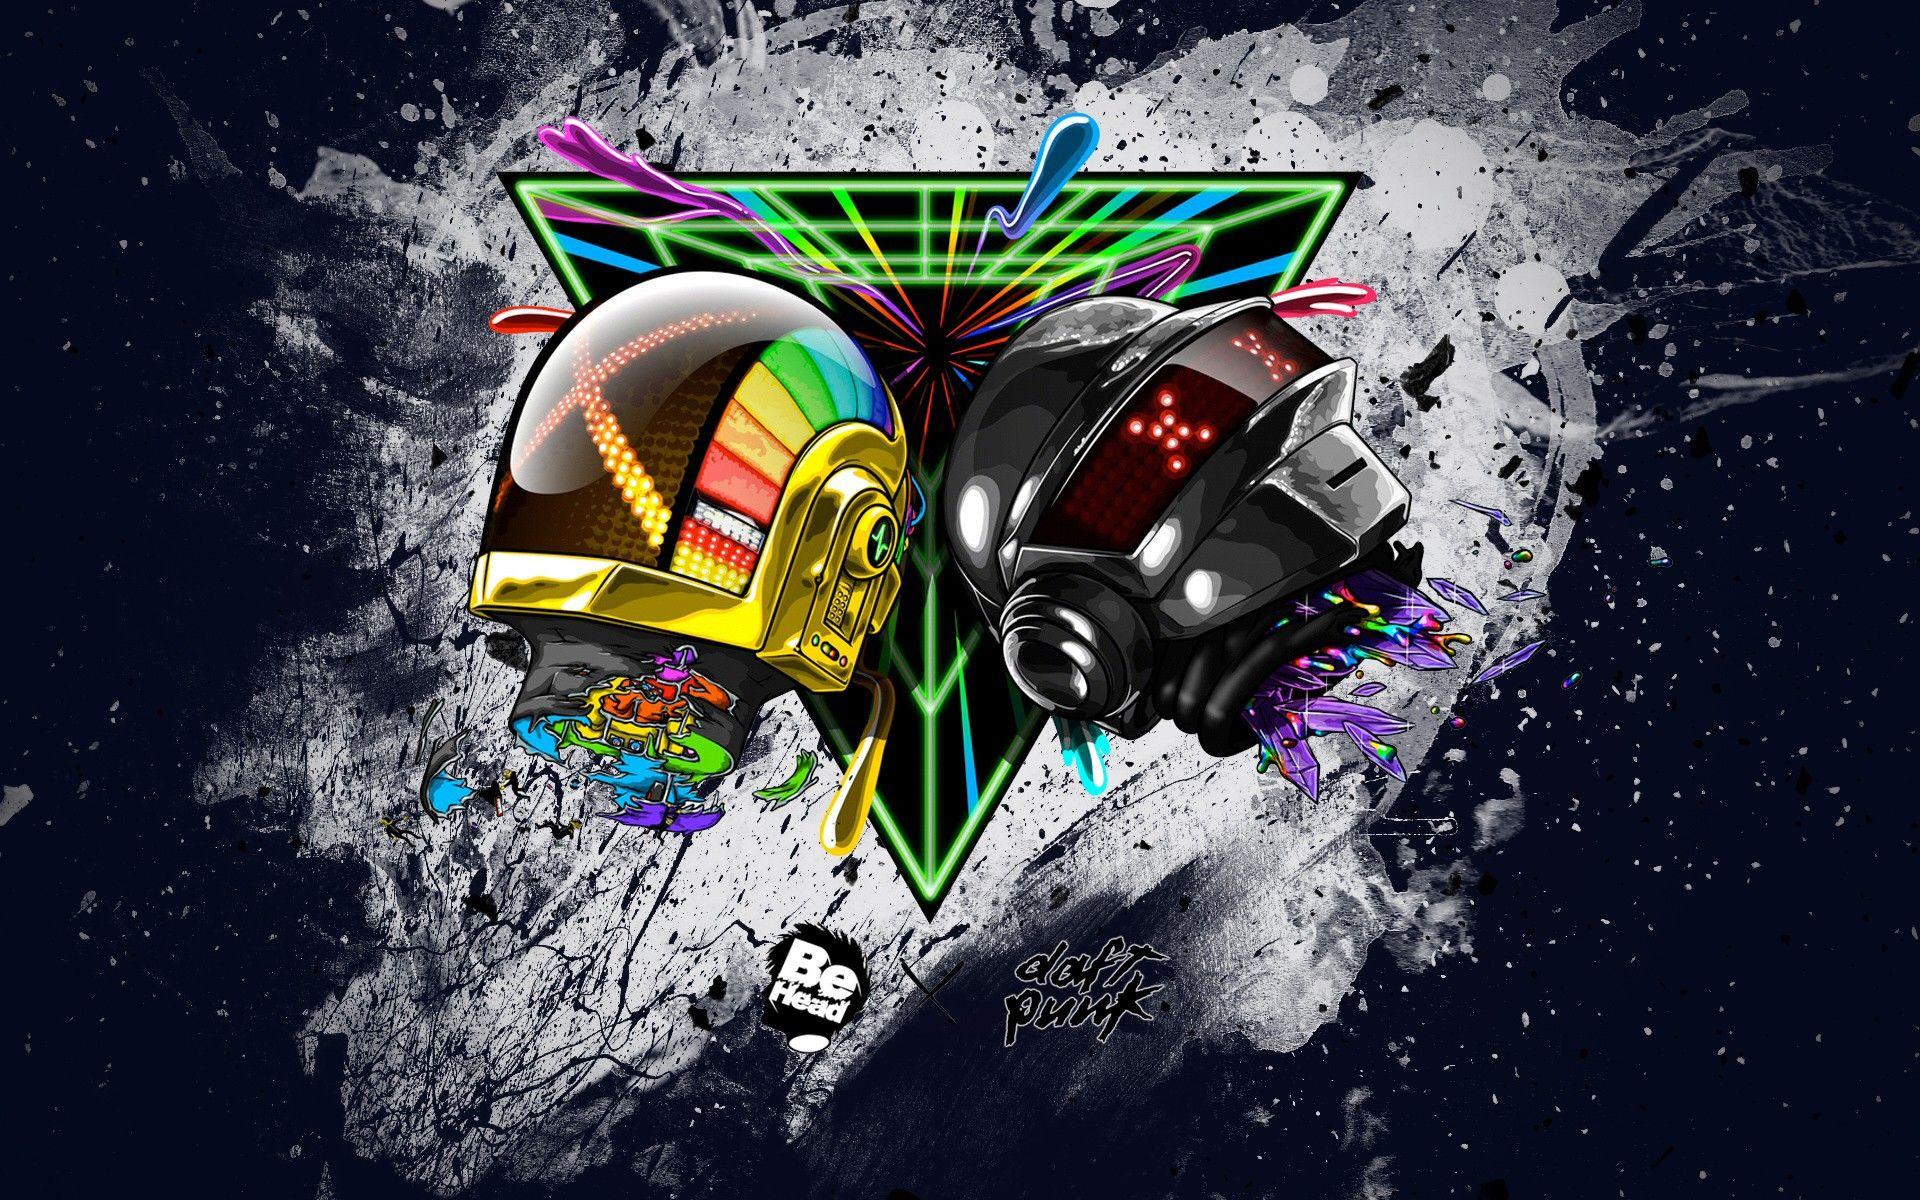 Daft Punk wallpapers, Music, HQ Daft Punk pictures | 4K Wallpapers 2019